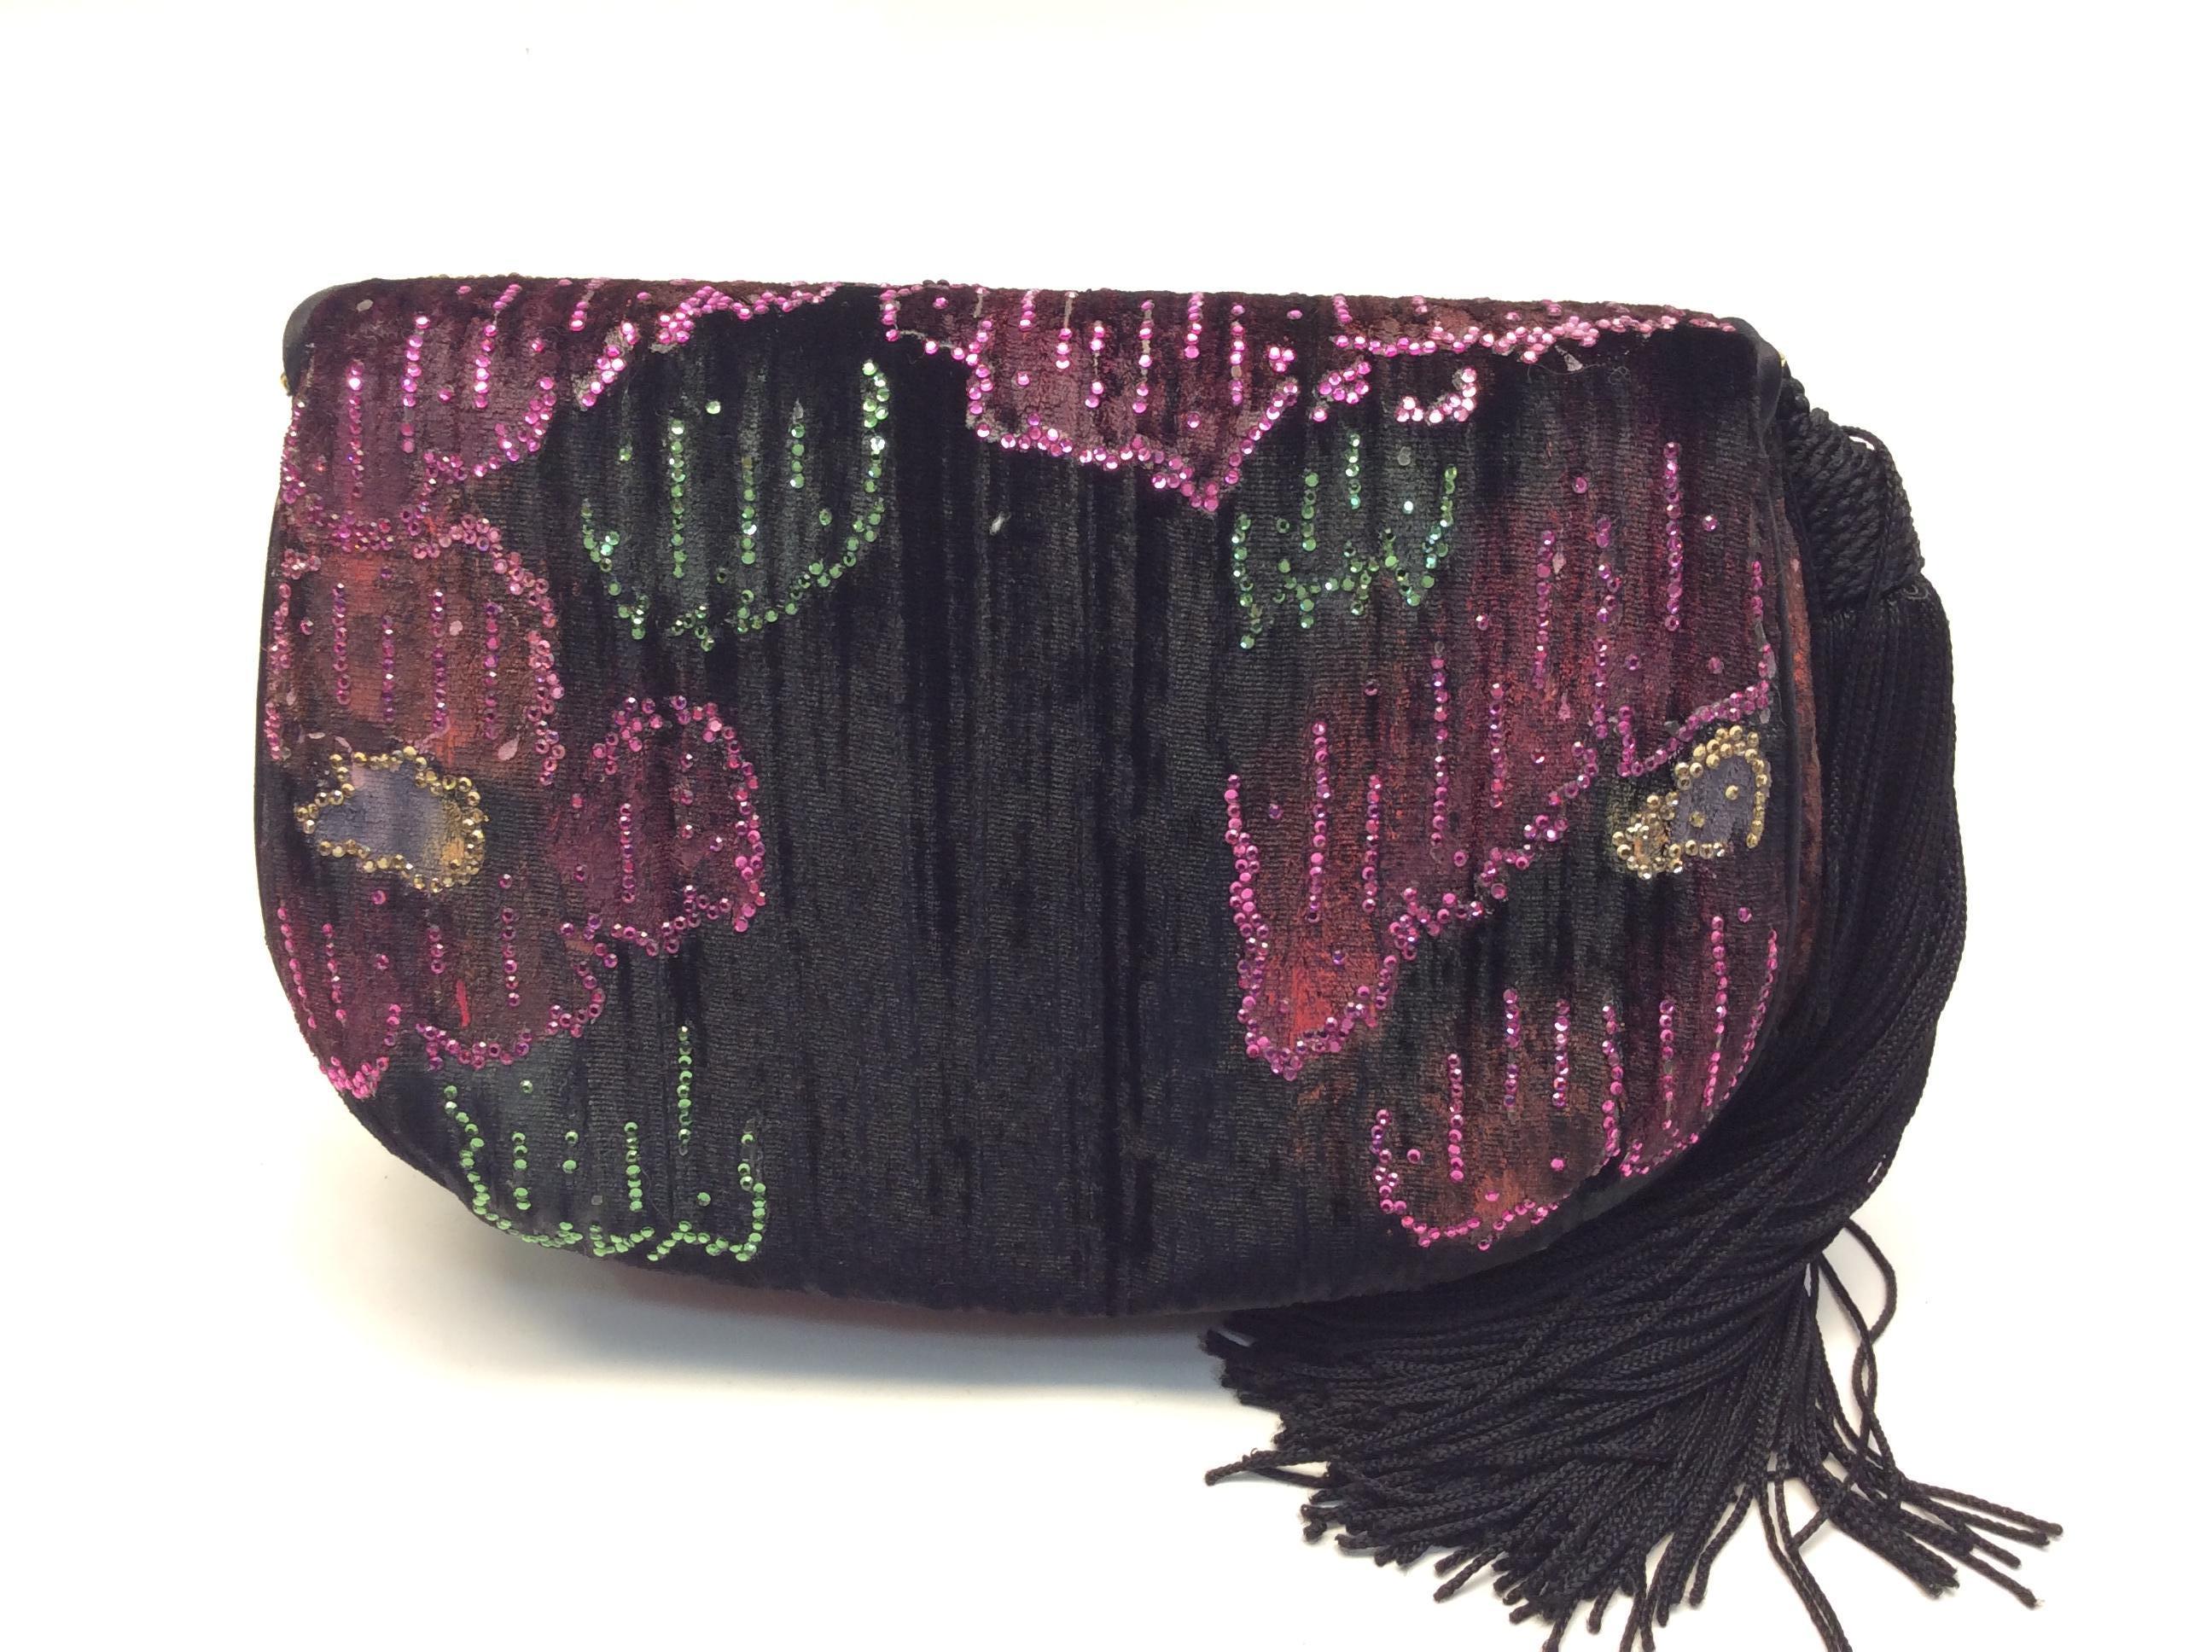 Judith Leiber Black Velvet Floral Clutch In Good Condition For Sale In Narberth, PA